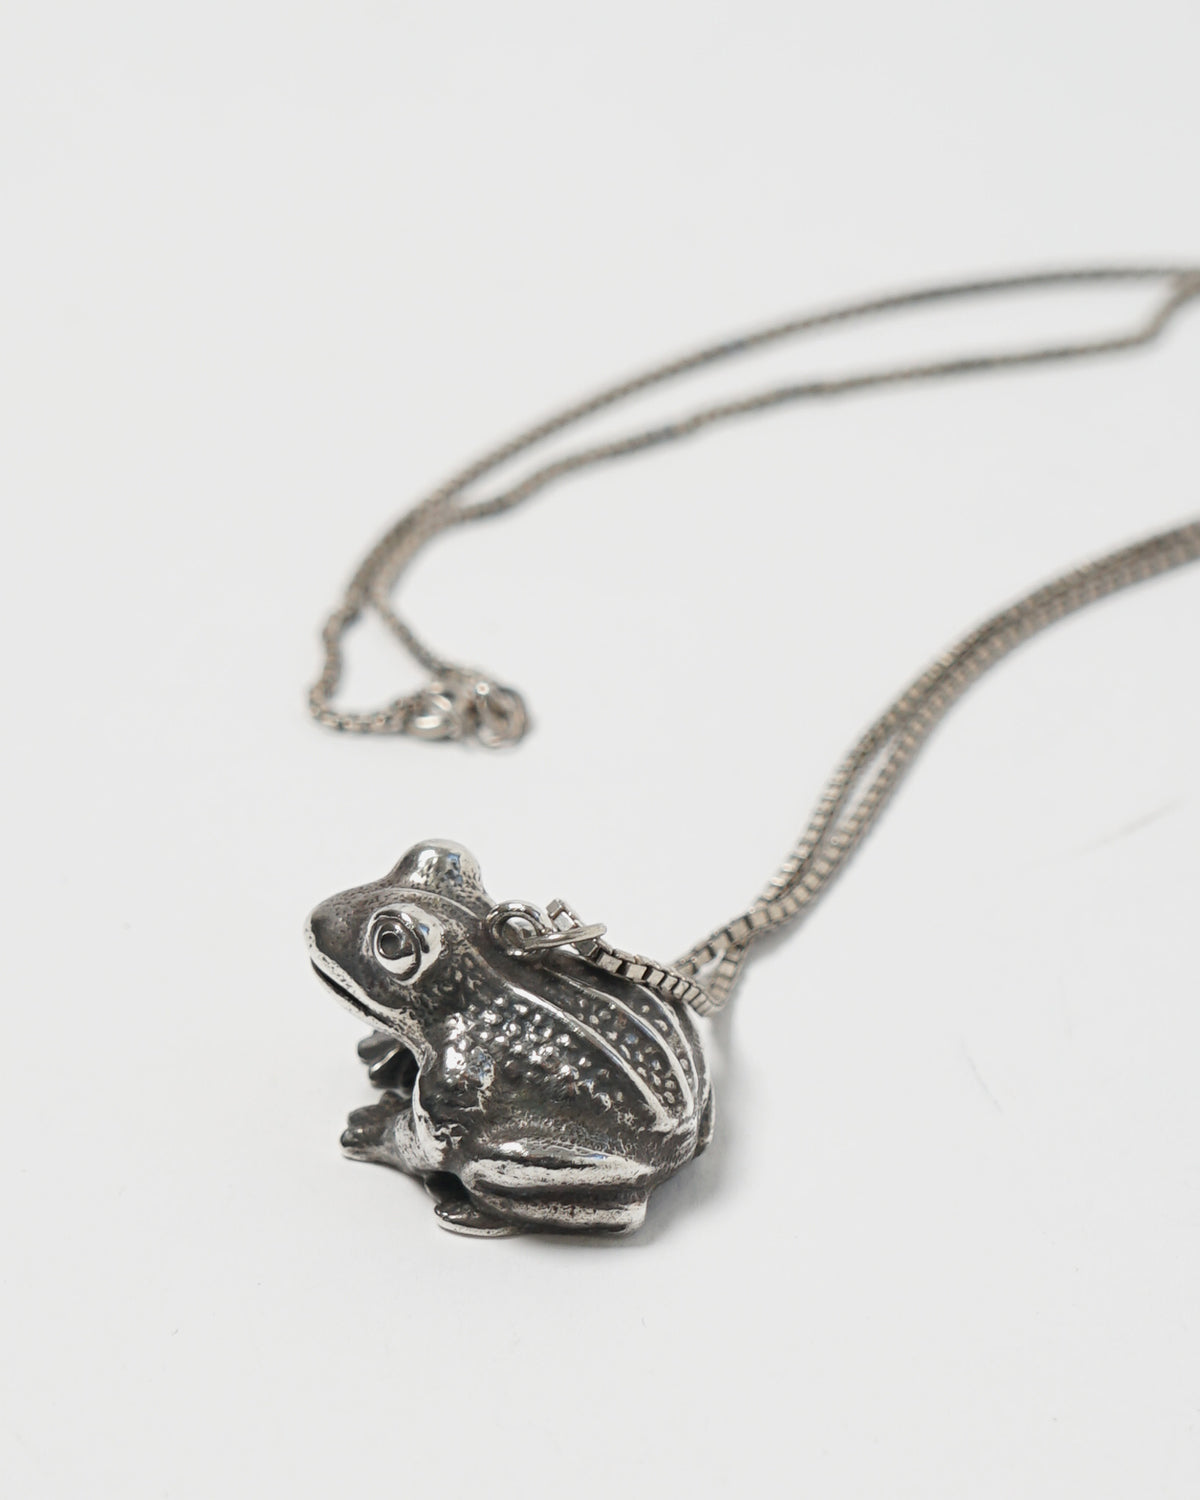 Silver Chain Necklace w/ Frog Charm